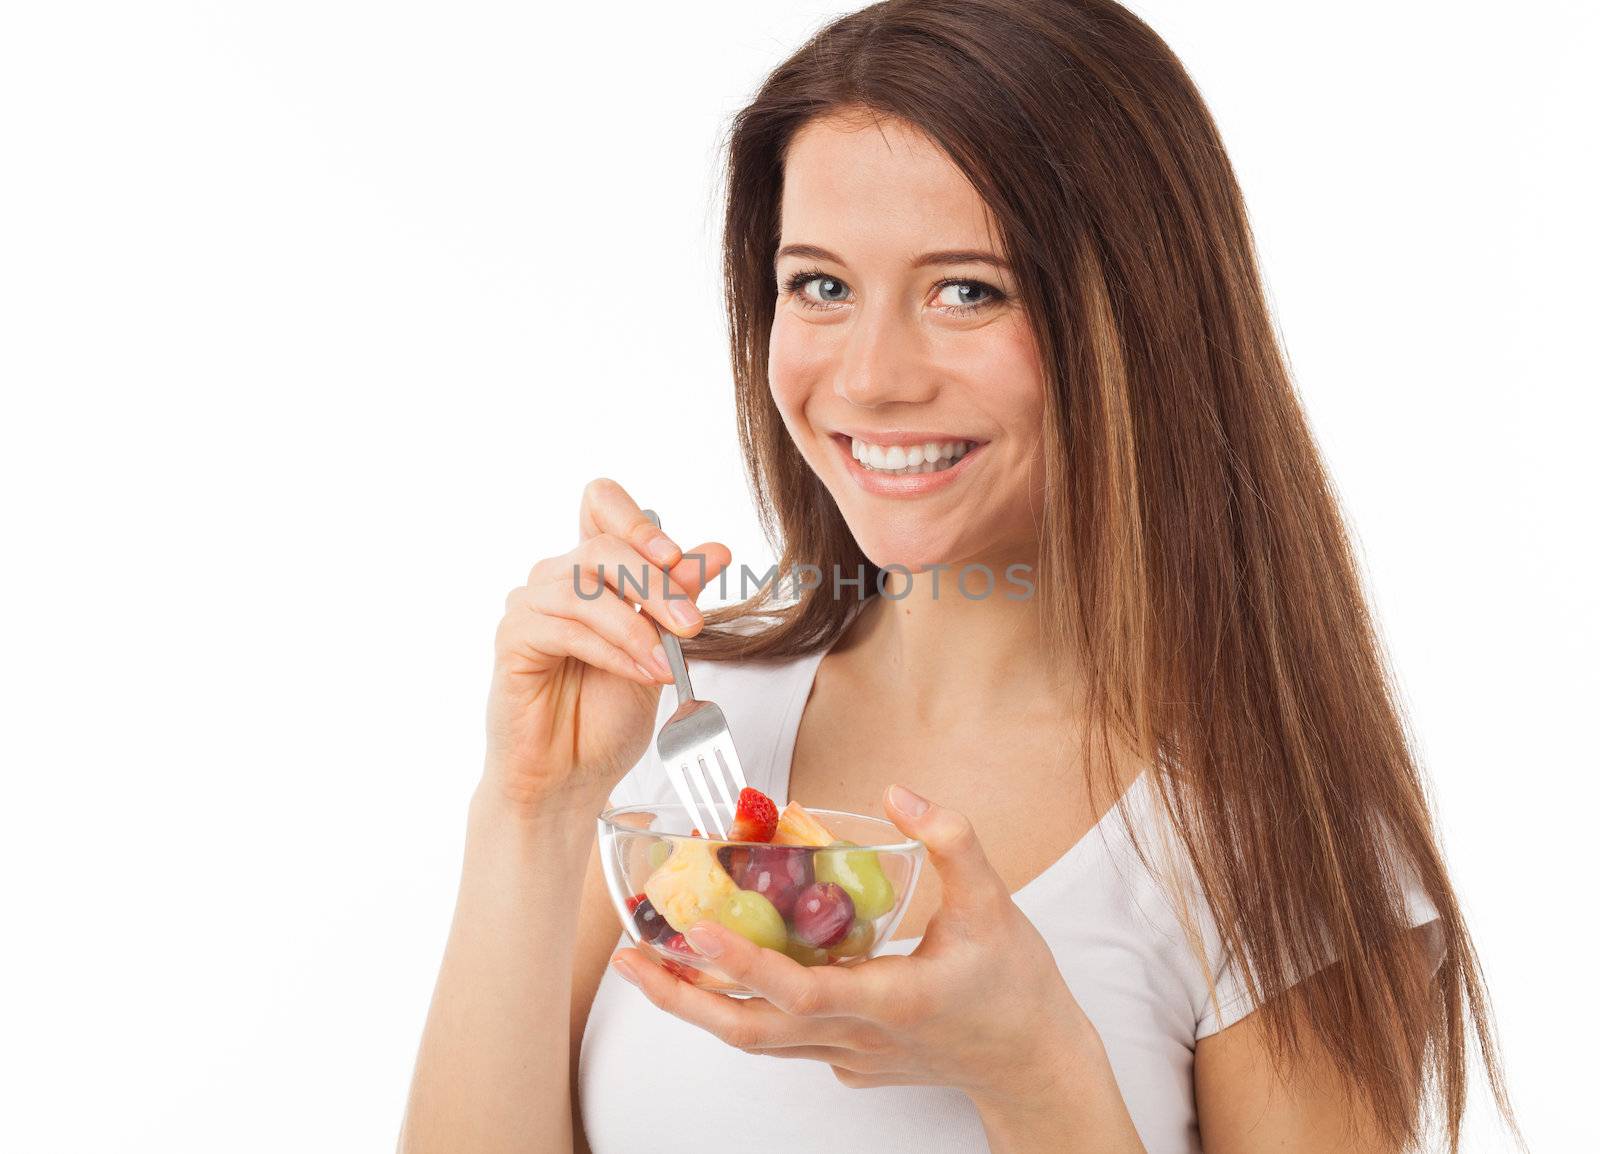 Pretty woman eating fruits with a fork, isolated on white